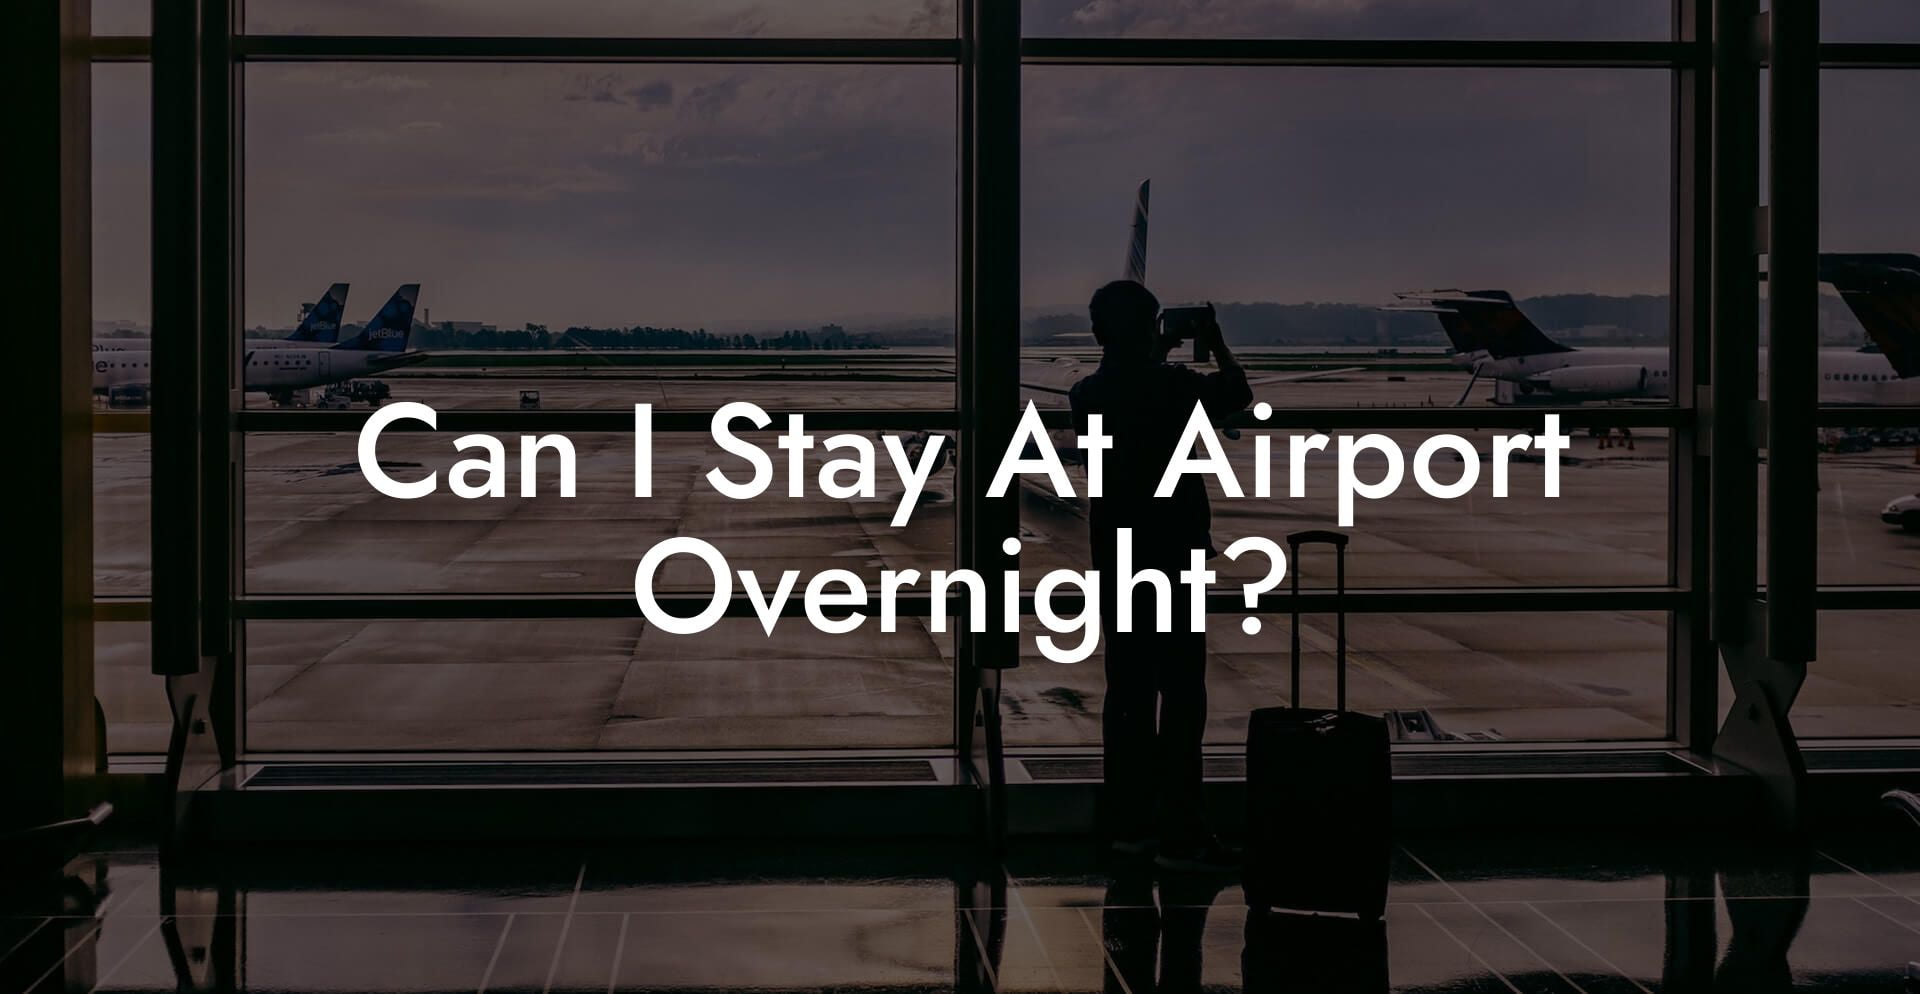 Can I Stay At Airport Overnight?